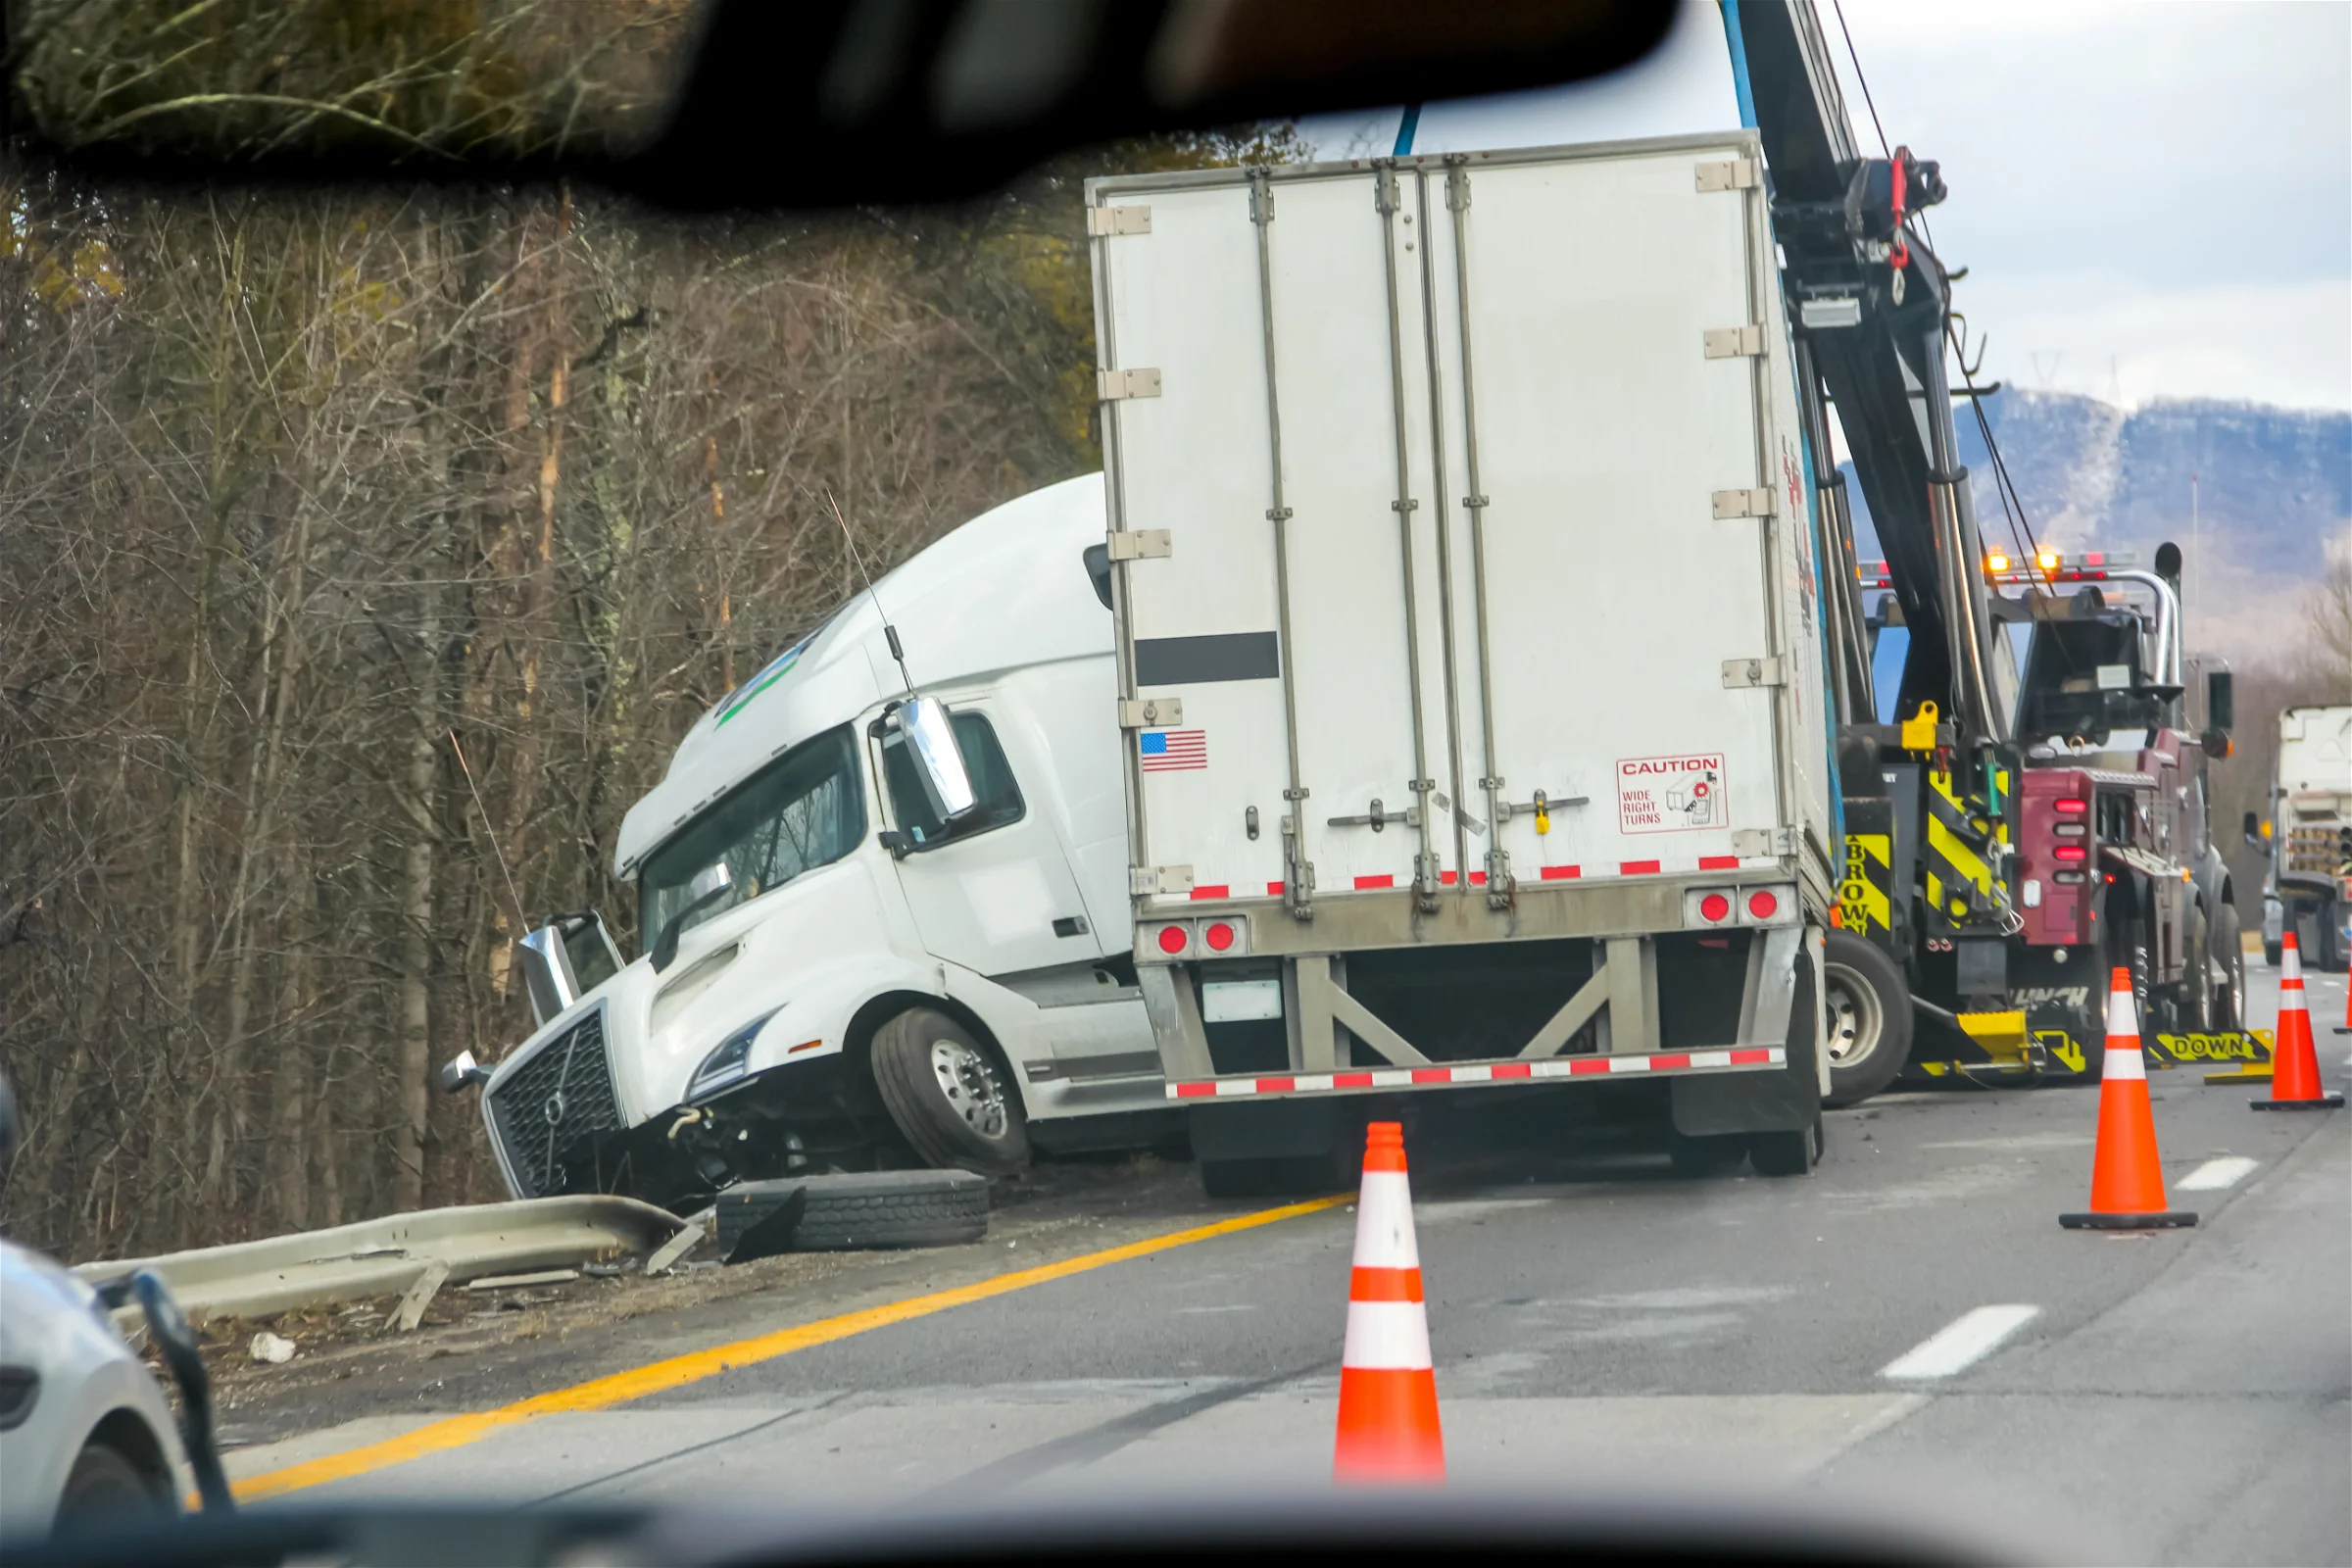 Statistics about heavy truck accidents on Pennsylvania state roads show concerning trends over recent years.